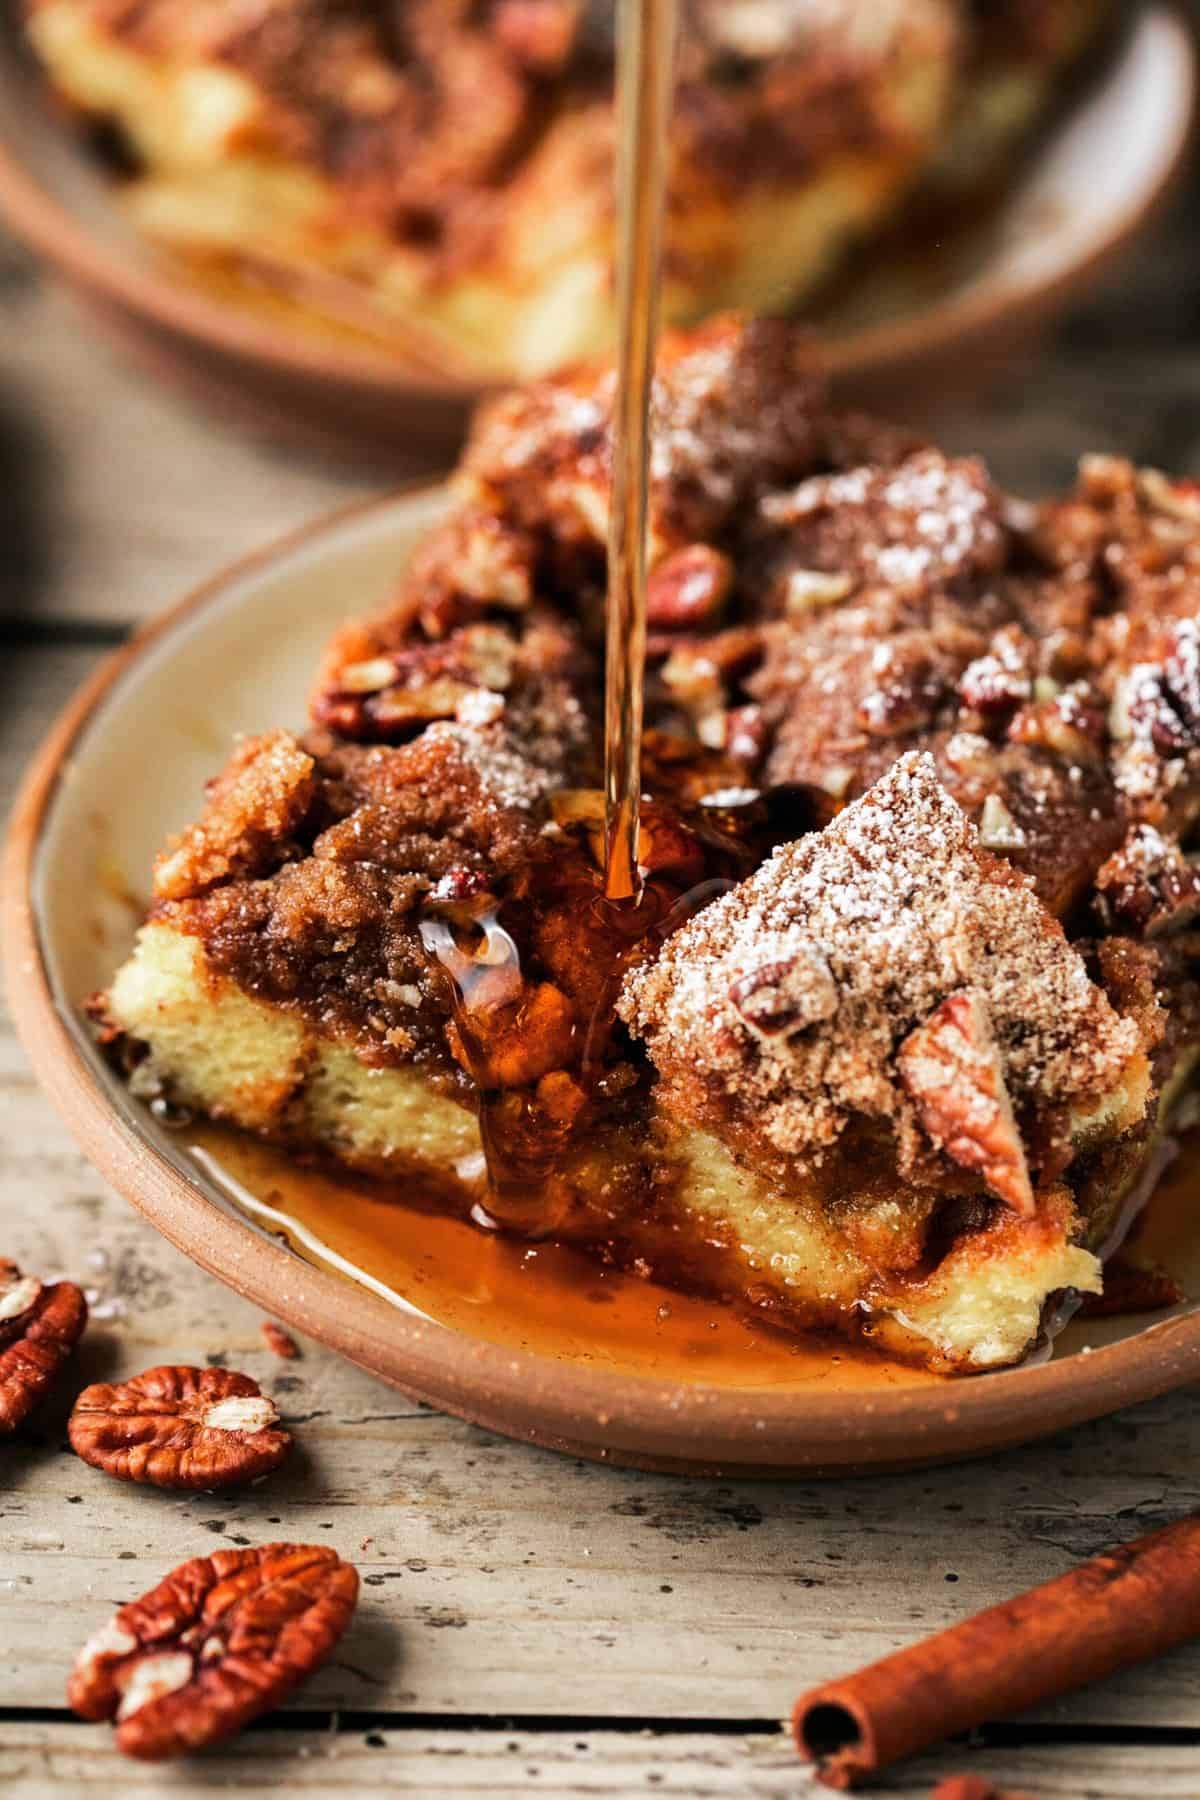 syrup pouring onto french toast bake with pecan topping